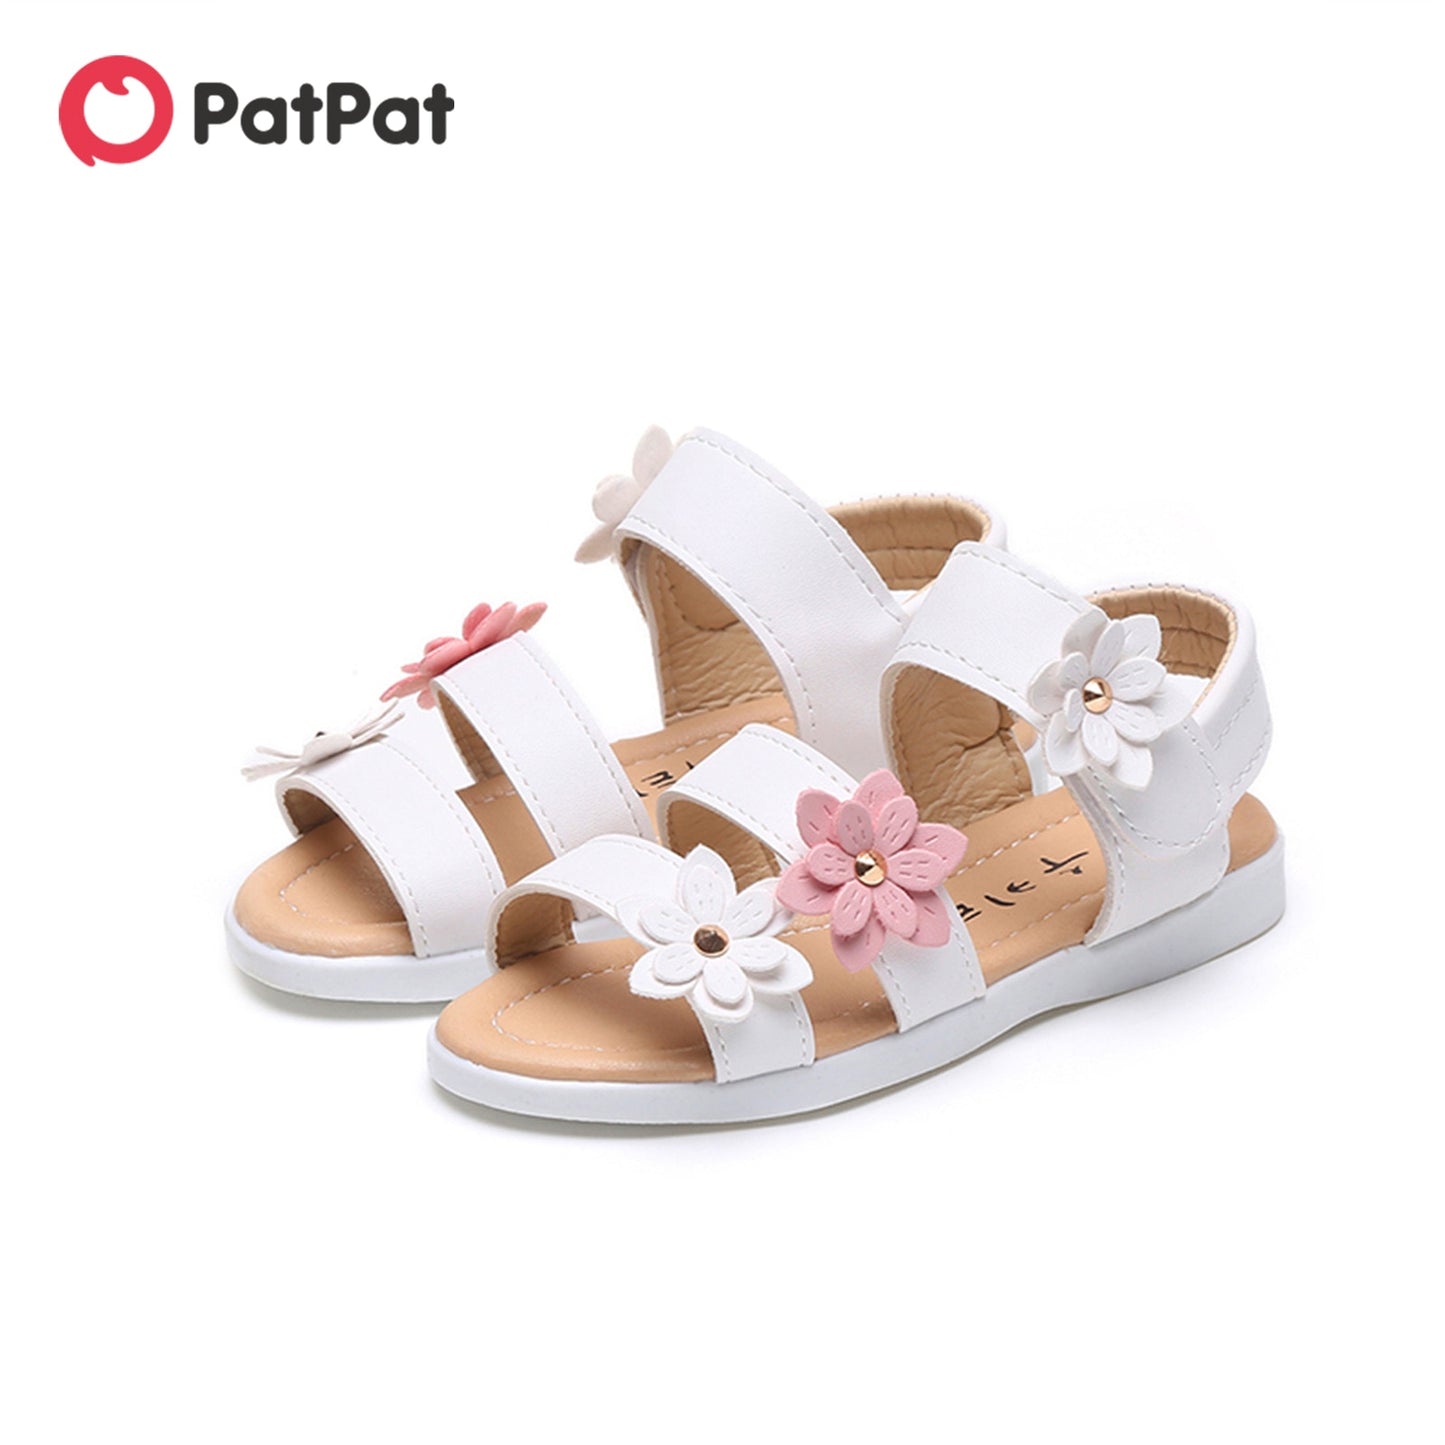 PatPat Toddler Girl Pretty Floral Decor Solid Sandals